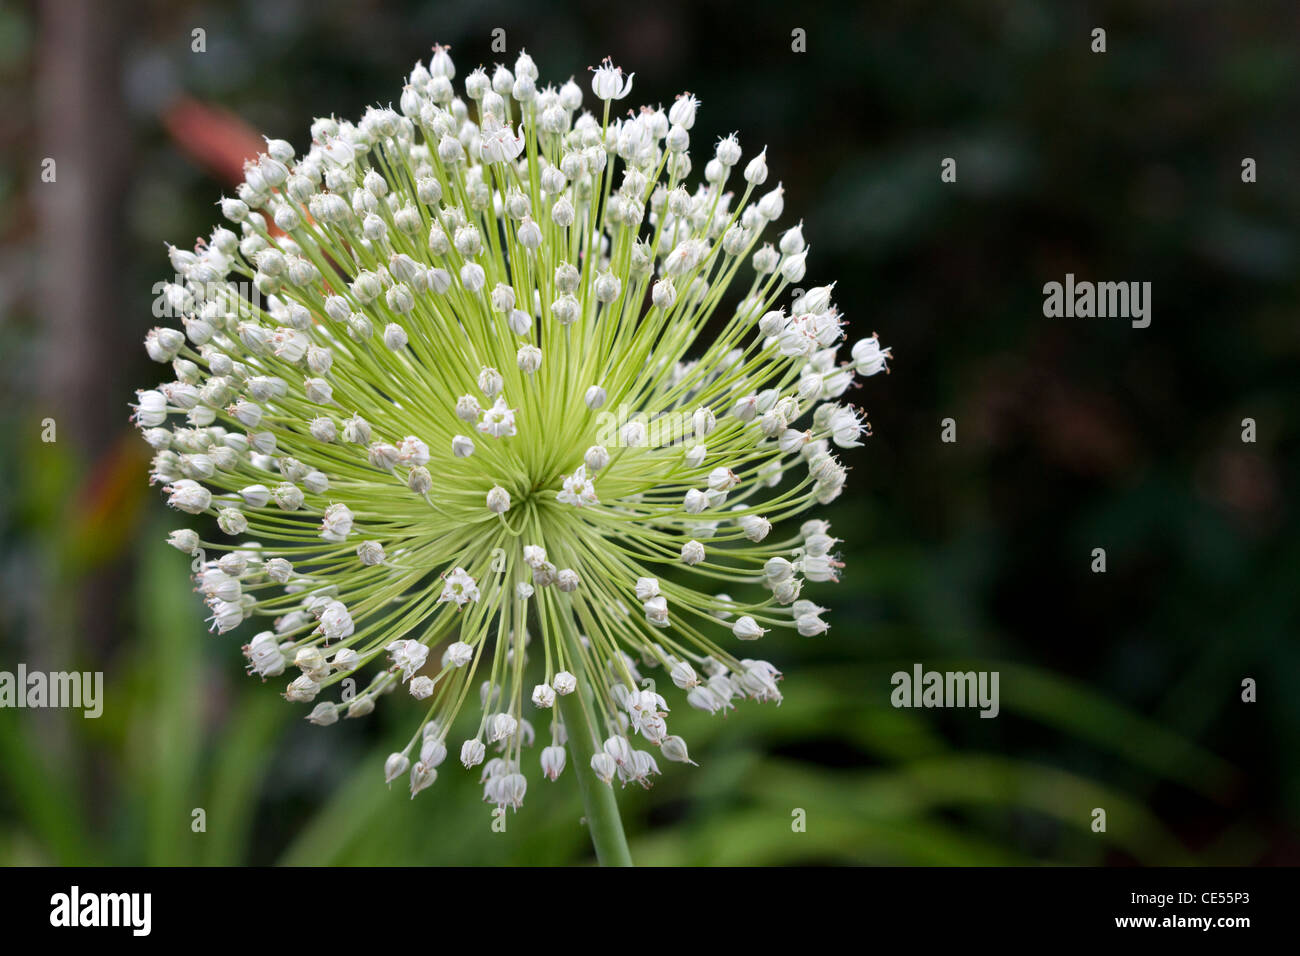 The bulbous flower of a garlic plant. Stock Photo